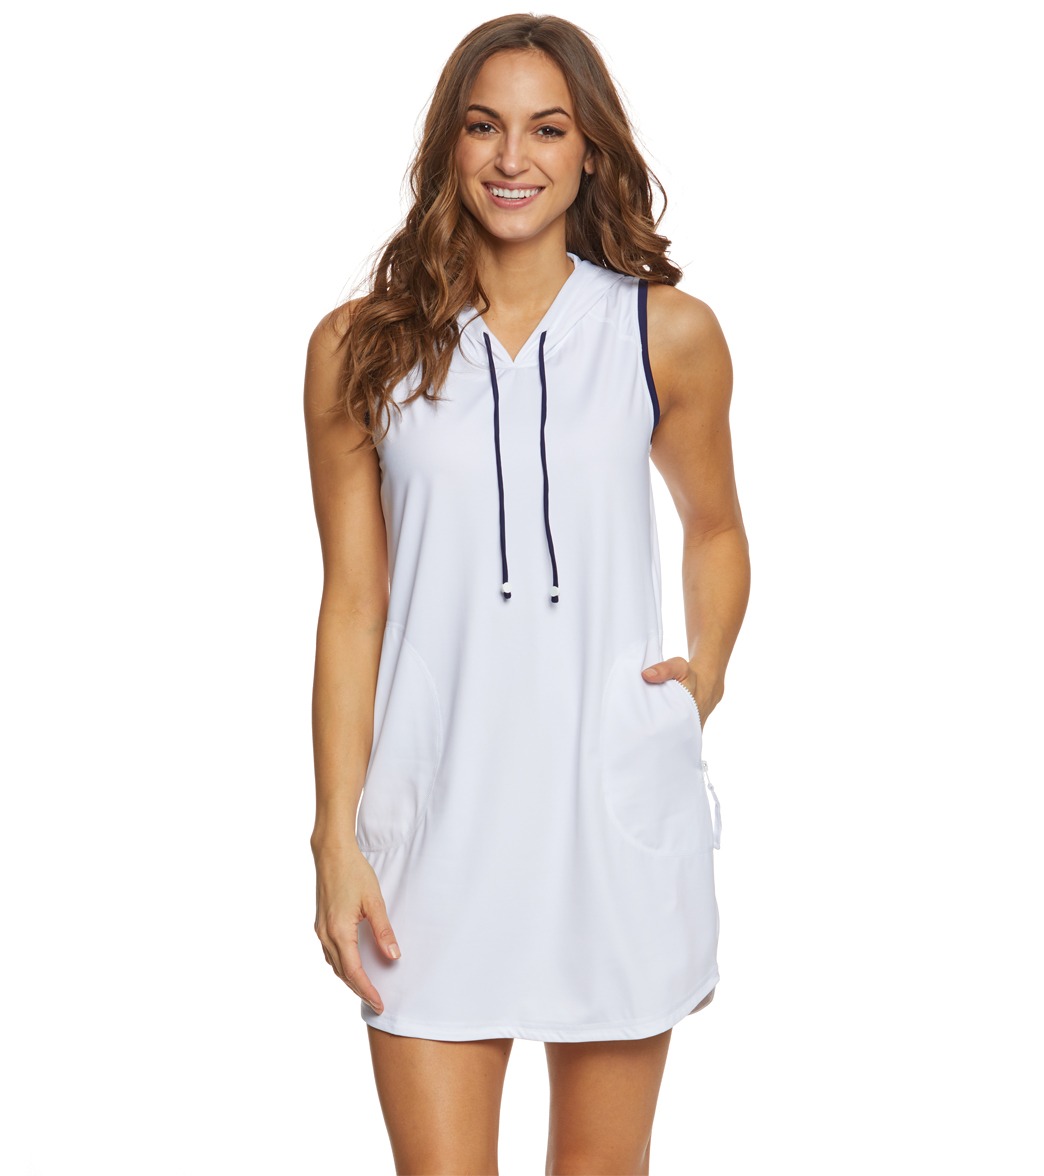 Tommy Bahama Women's Hooded Spa Dress at SwimOutlet.com - Free Shipping